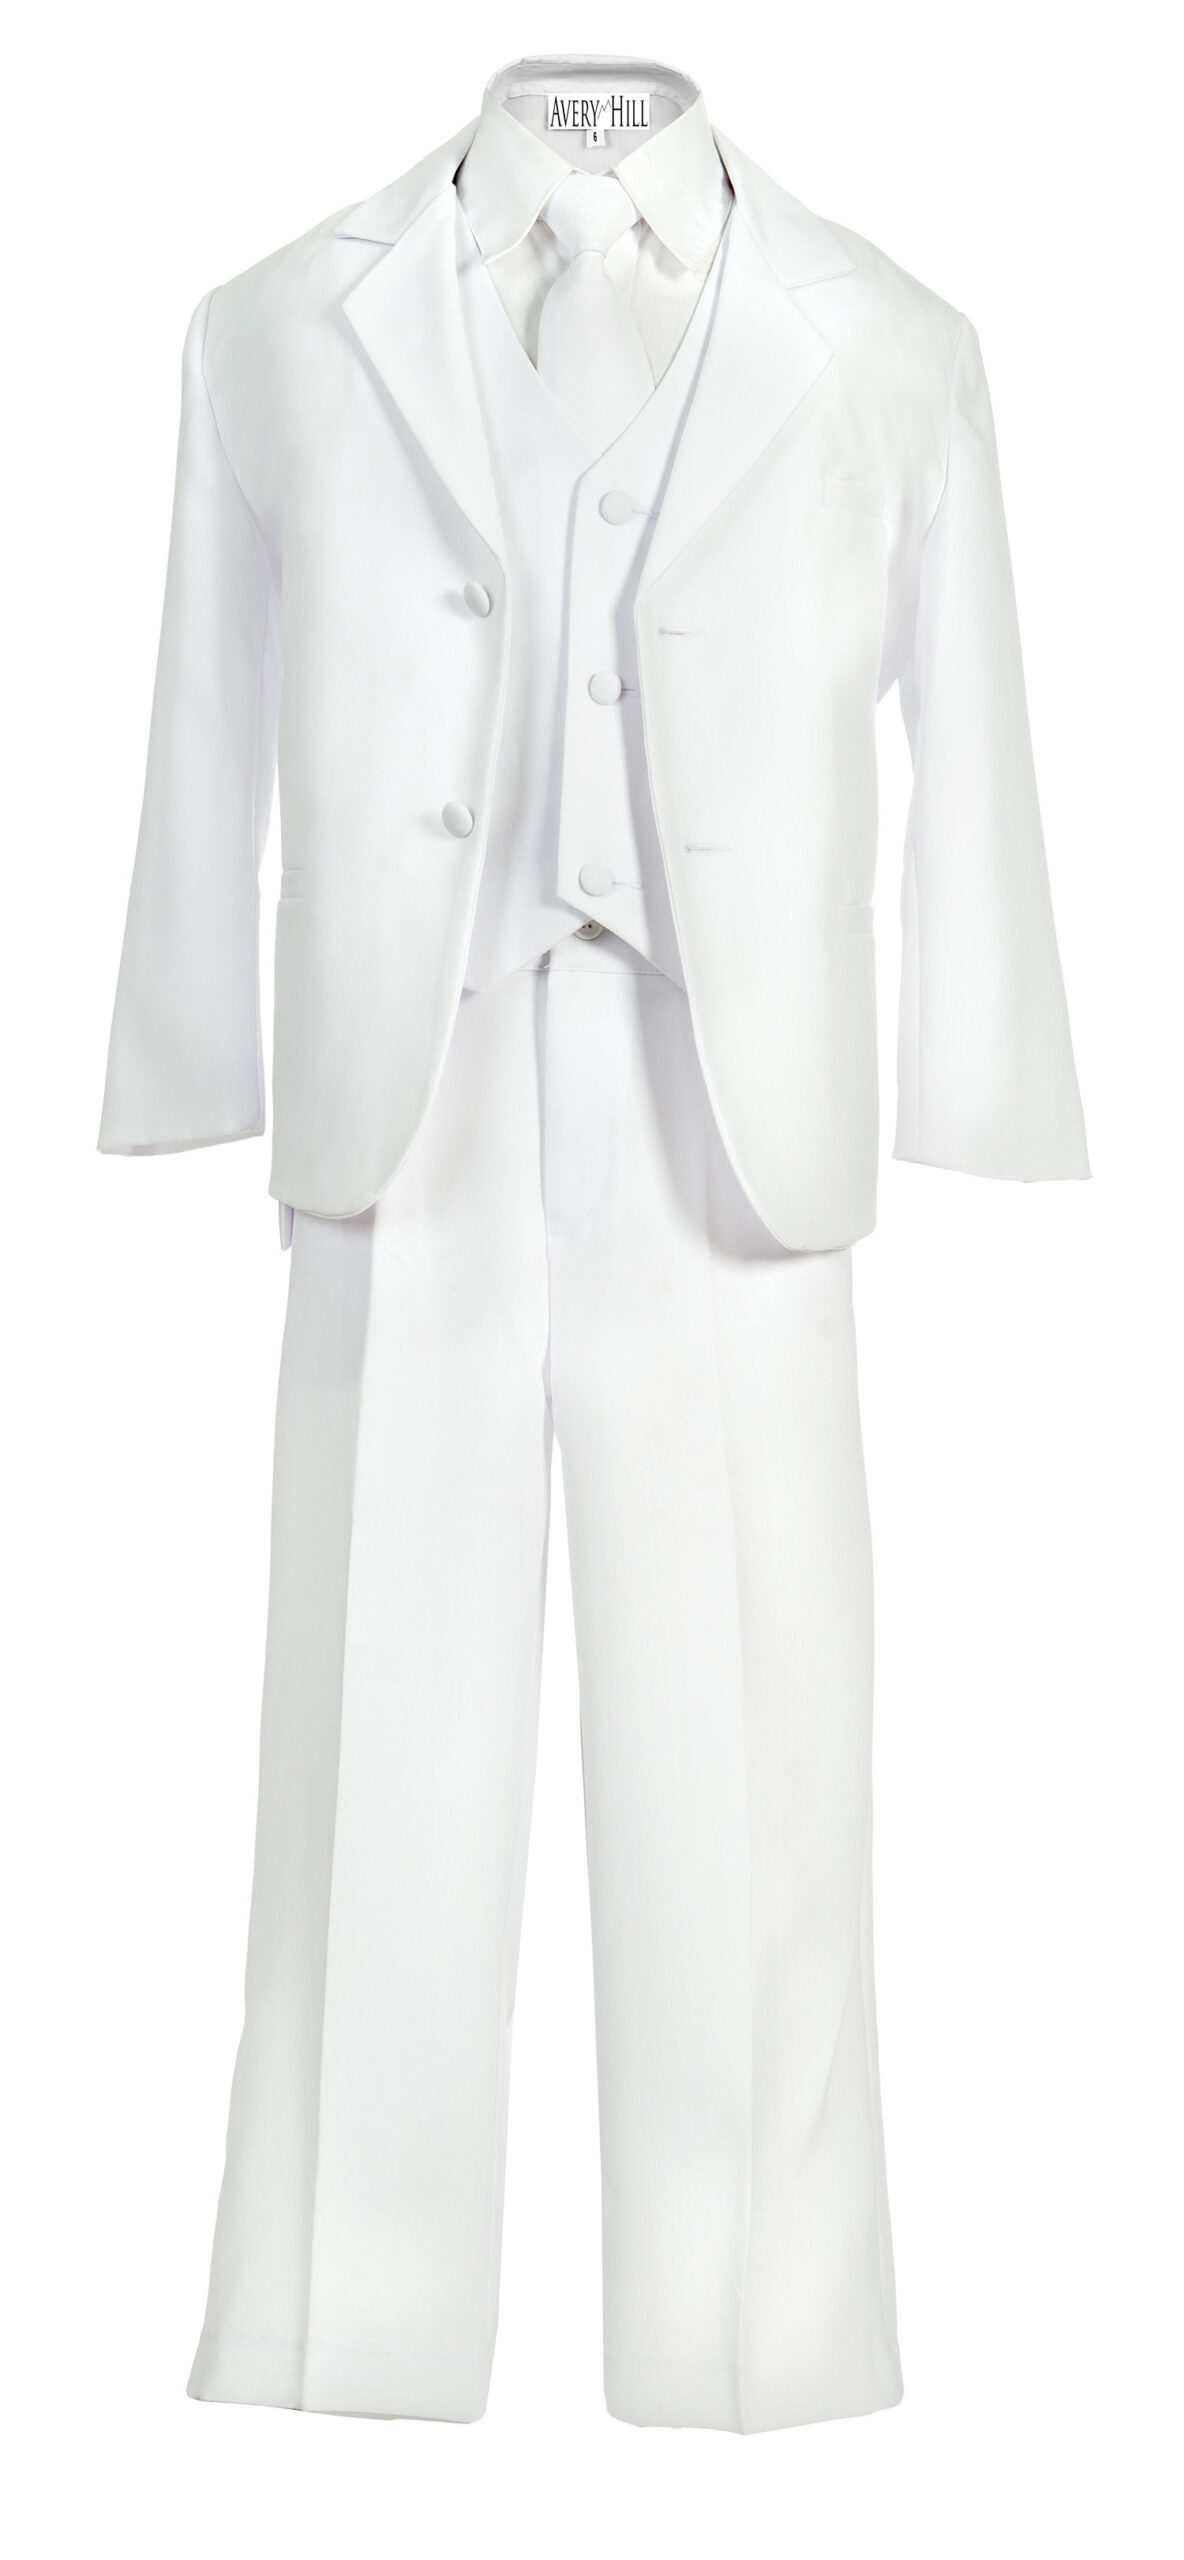 Avery Hill Boys Formal 5 Piece Suit with Shirt and Vest White - 2T